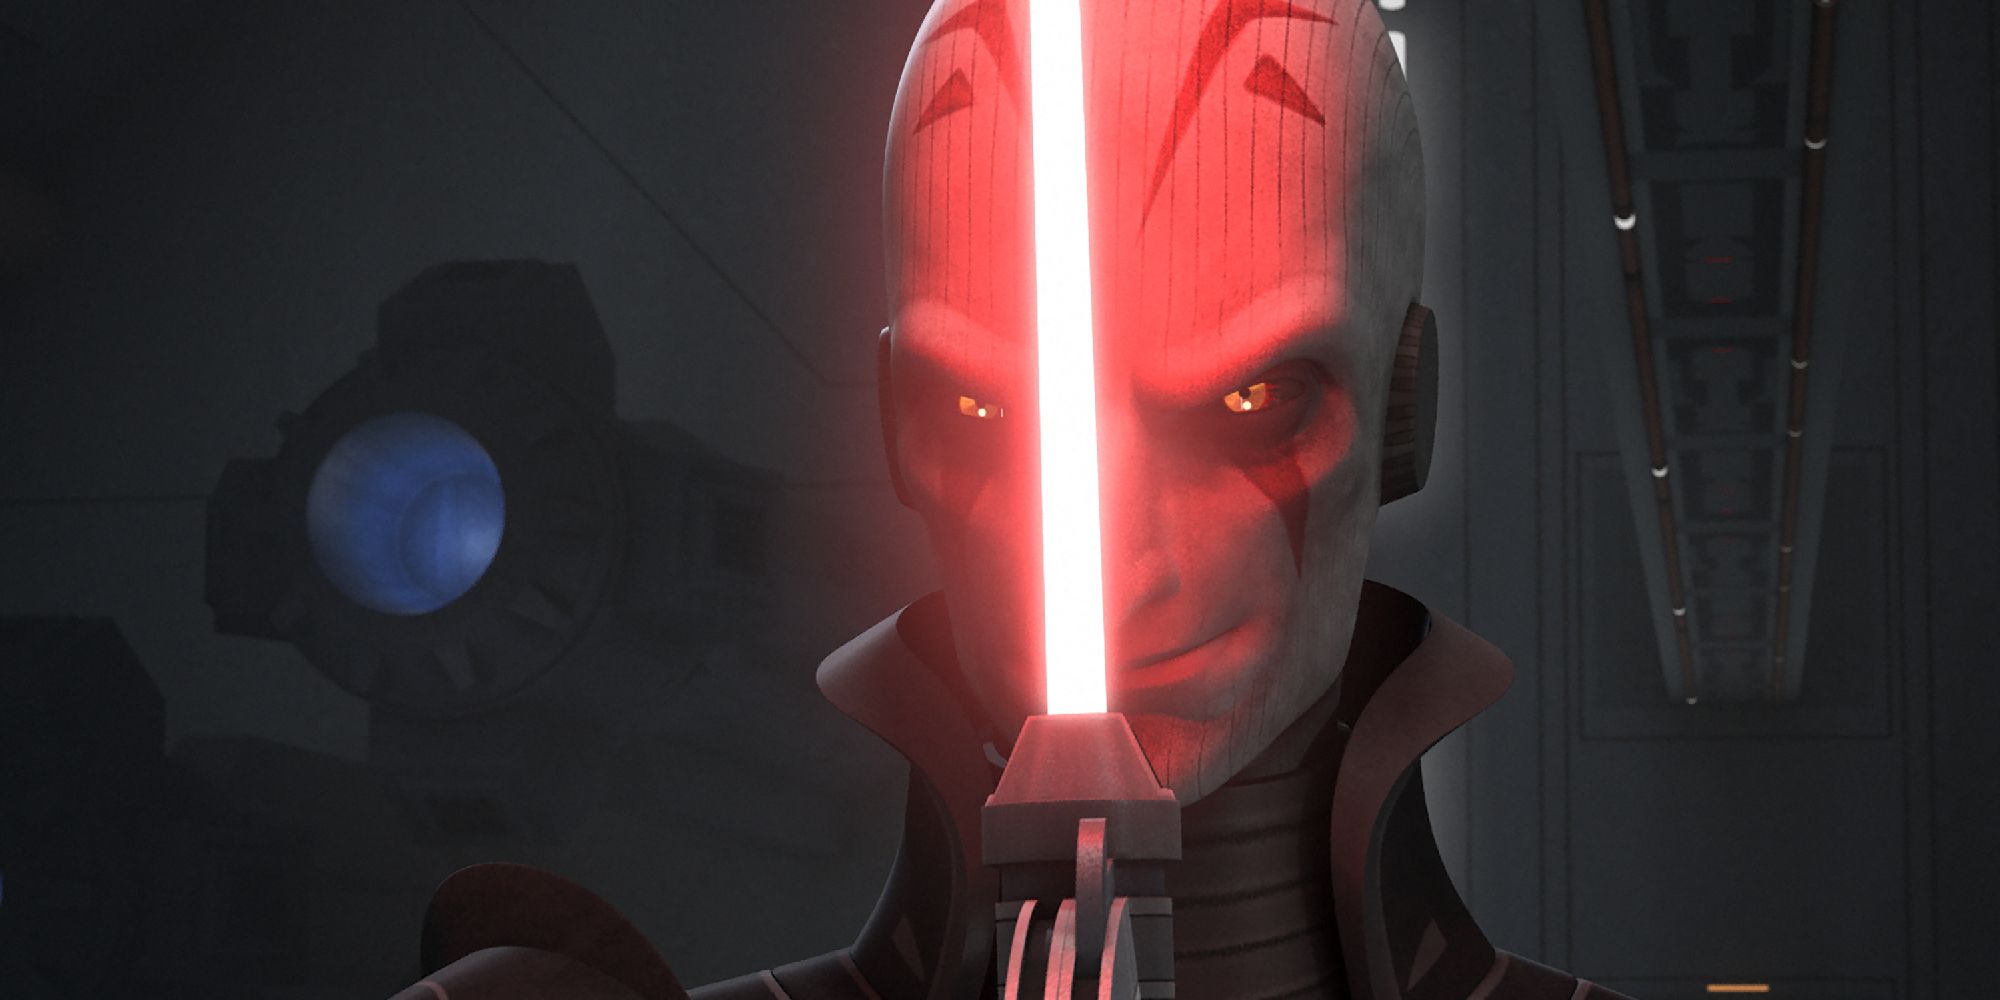 The Grand Inquisitor holding a lightsaber in front of his face in Star Wars Rebels